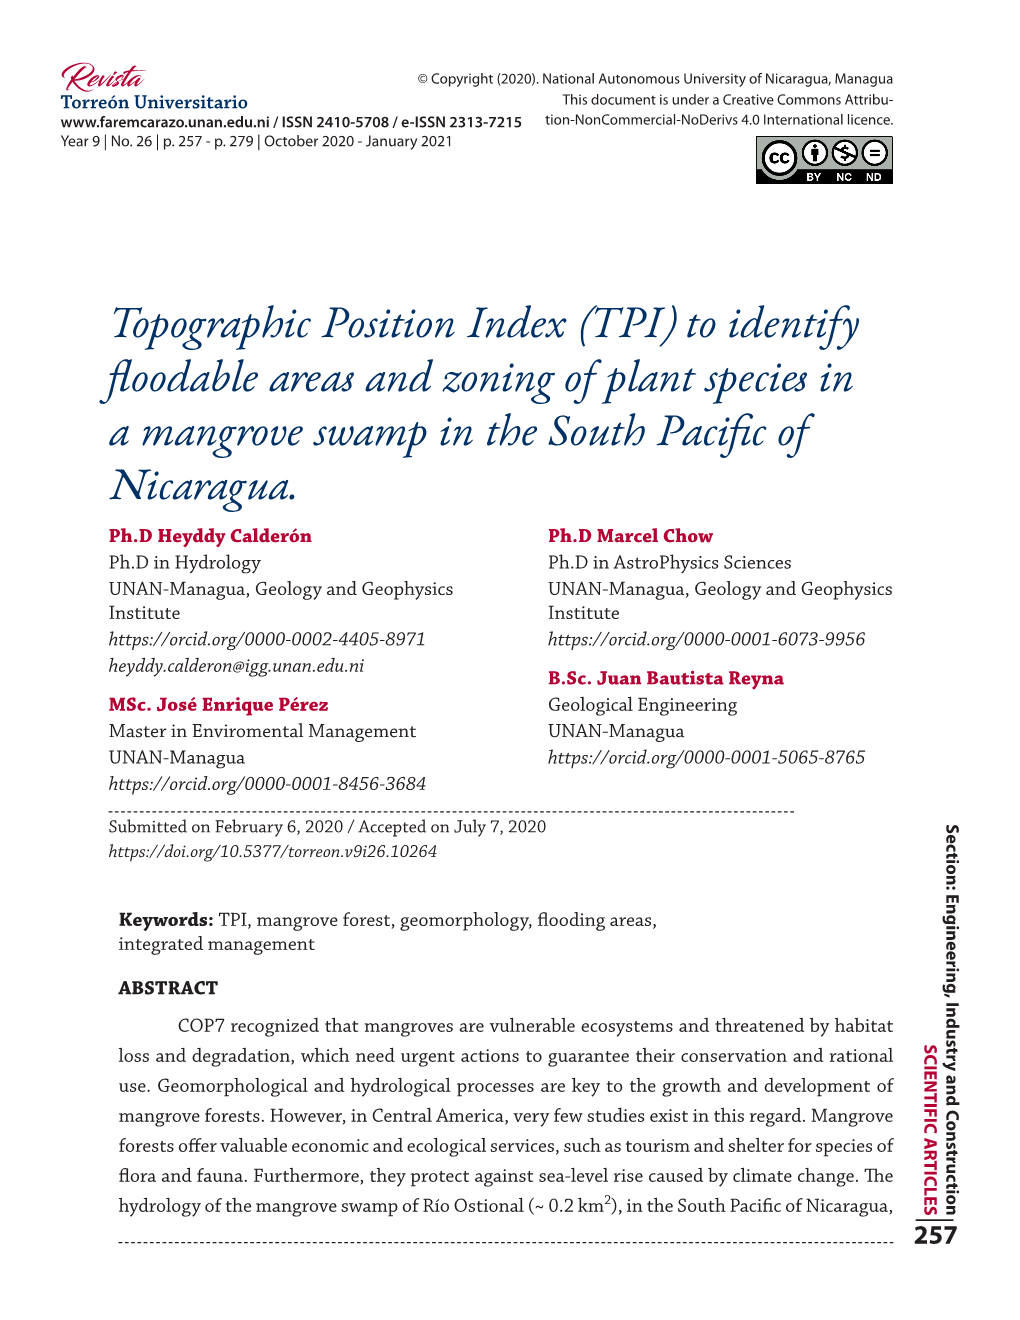 Topographic Position Index (TPI) to Identify Floodable Areas and Zoning of Plant Species in a Mangrove Swamp in the South Pacific of Nicaragua